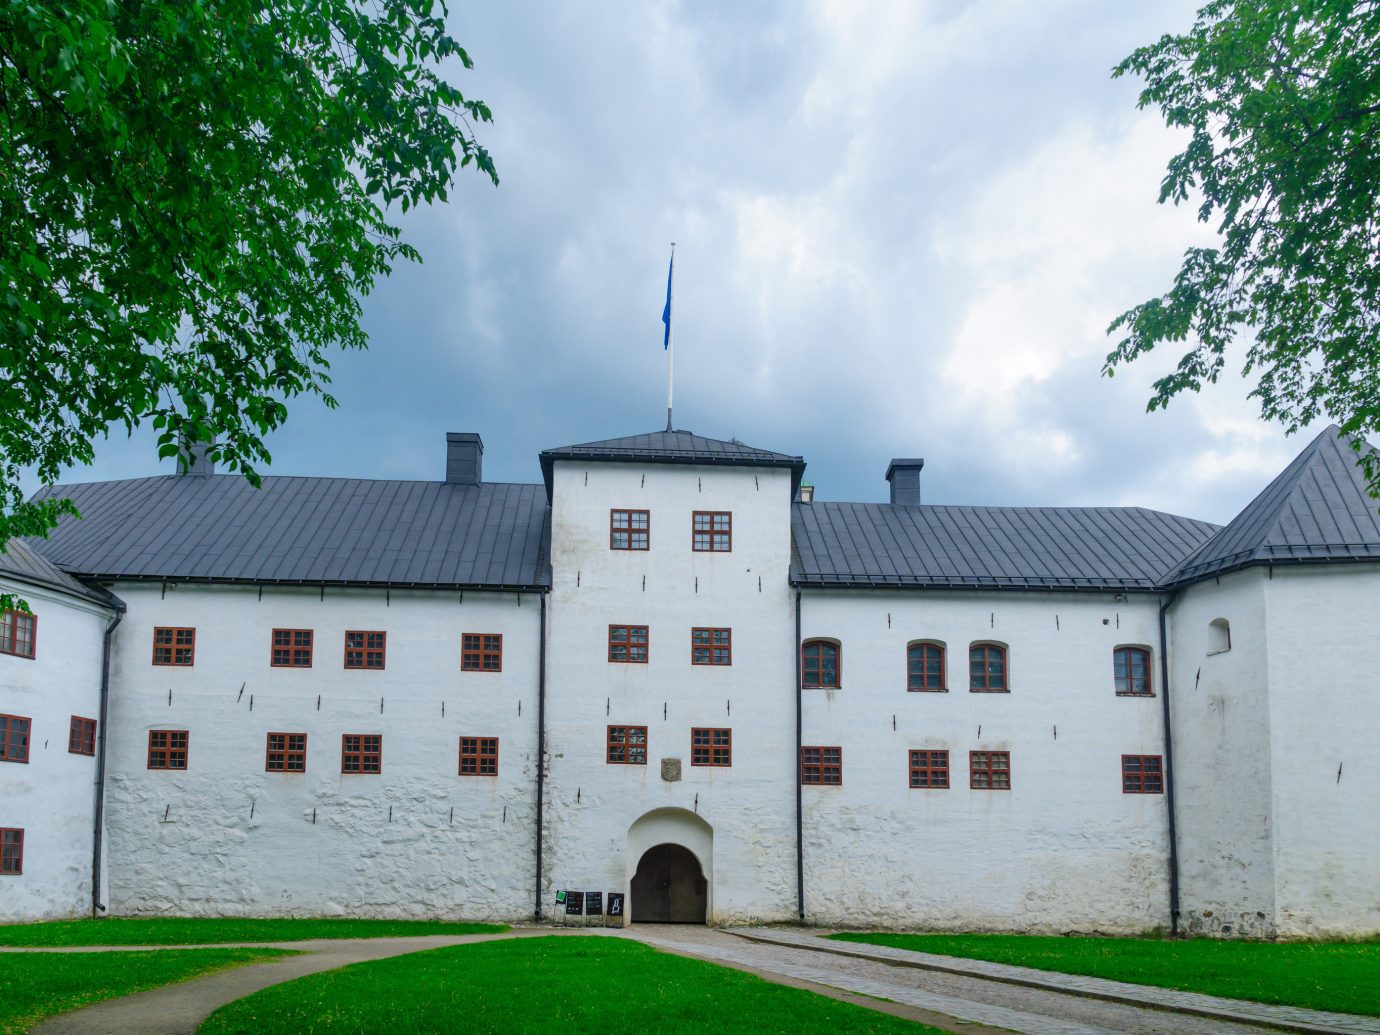 Finland Trip Ideas tree outdoor grass building sky house château estate property manor house facade stately home mansion castle medieval architecture national trust for places of historic interest or natural beauty palace window almshouse abbey residential roof old